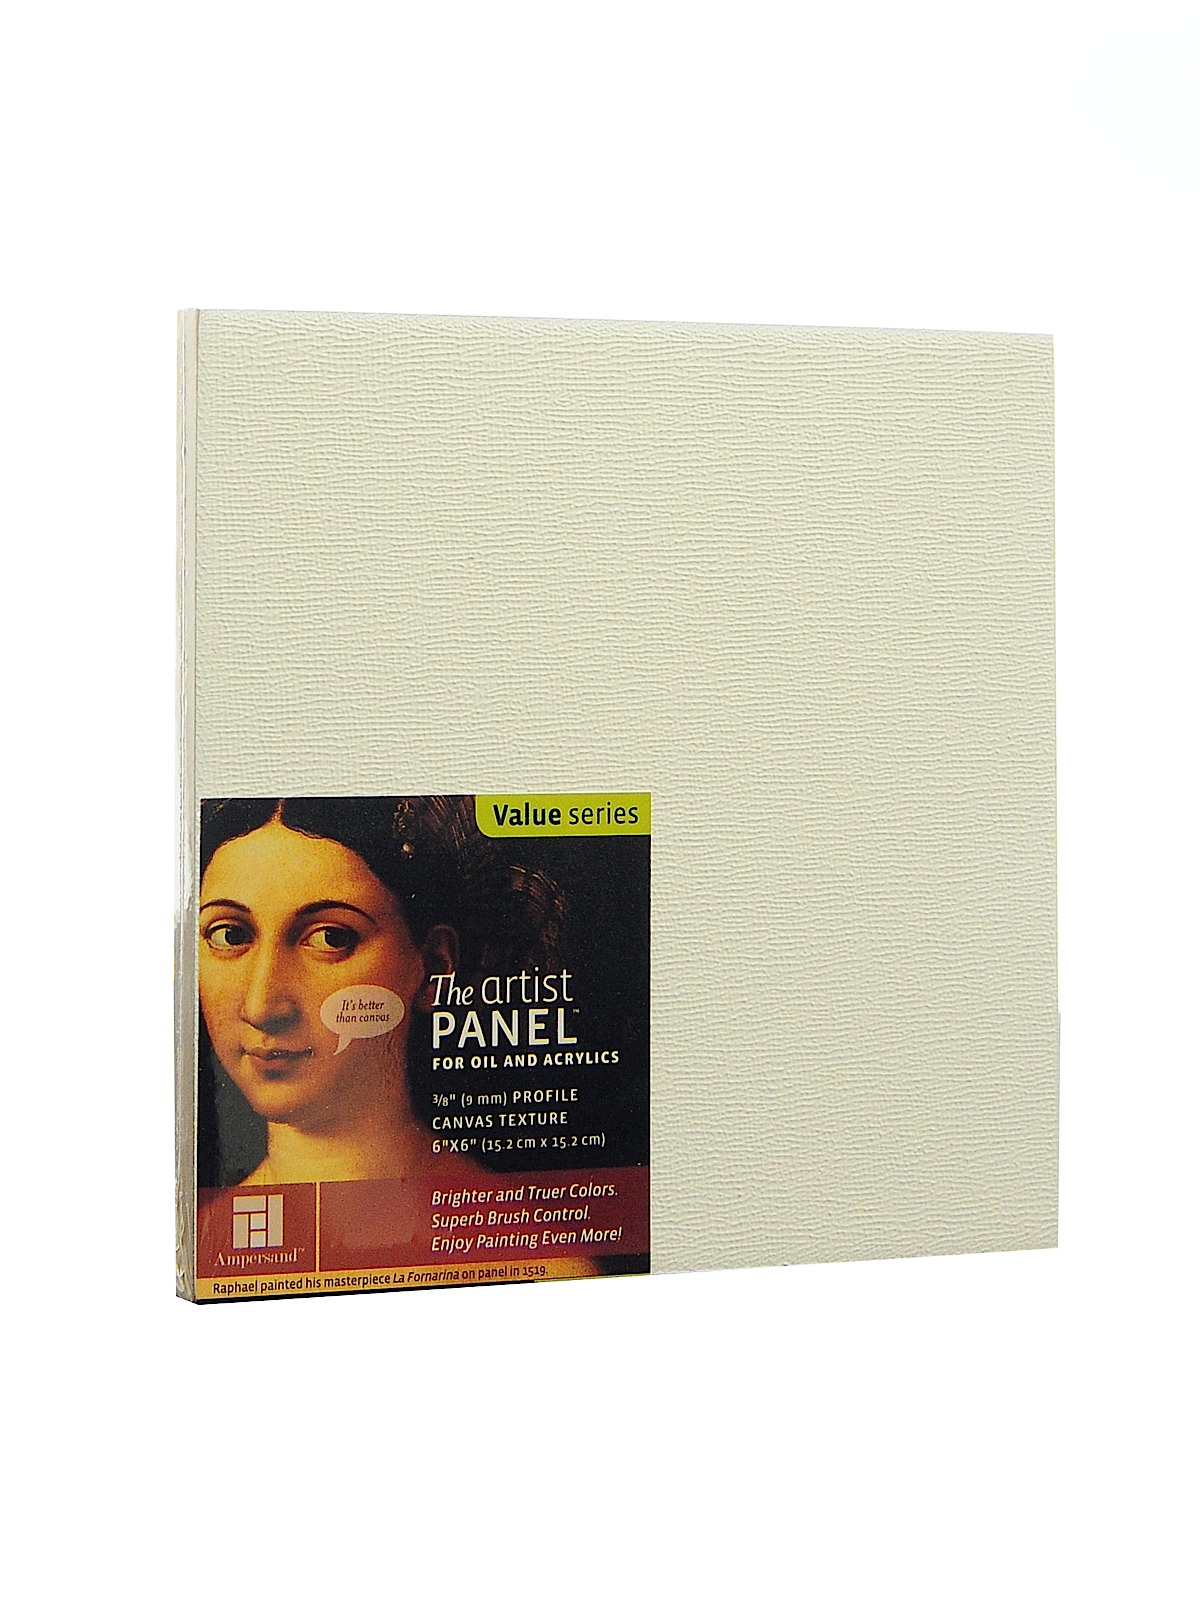 The Artist Panel Canvas Texture Flat Profile 6 In. X 6 In. 3 8 In.